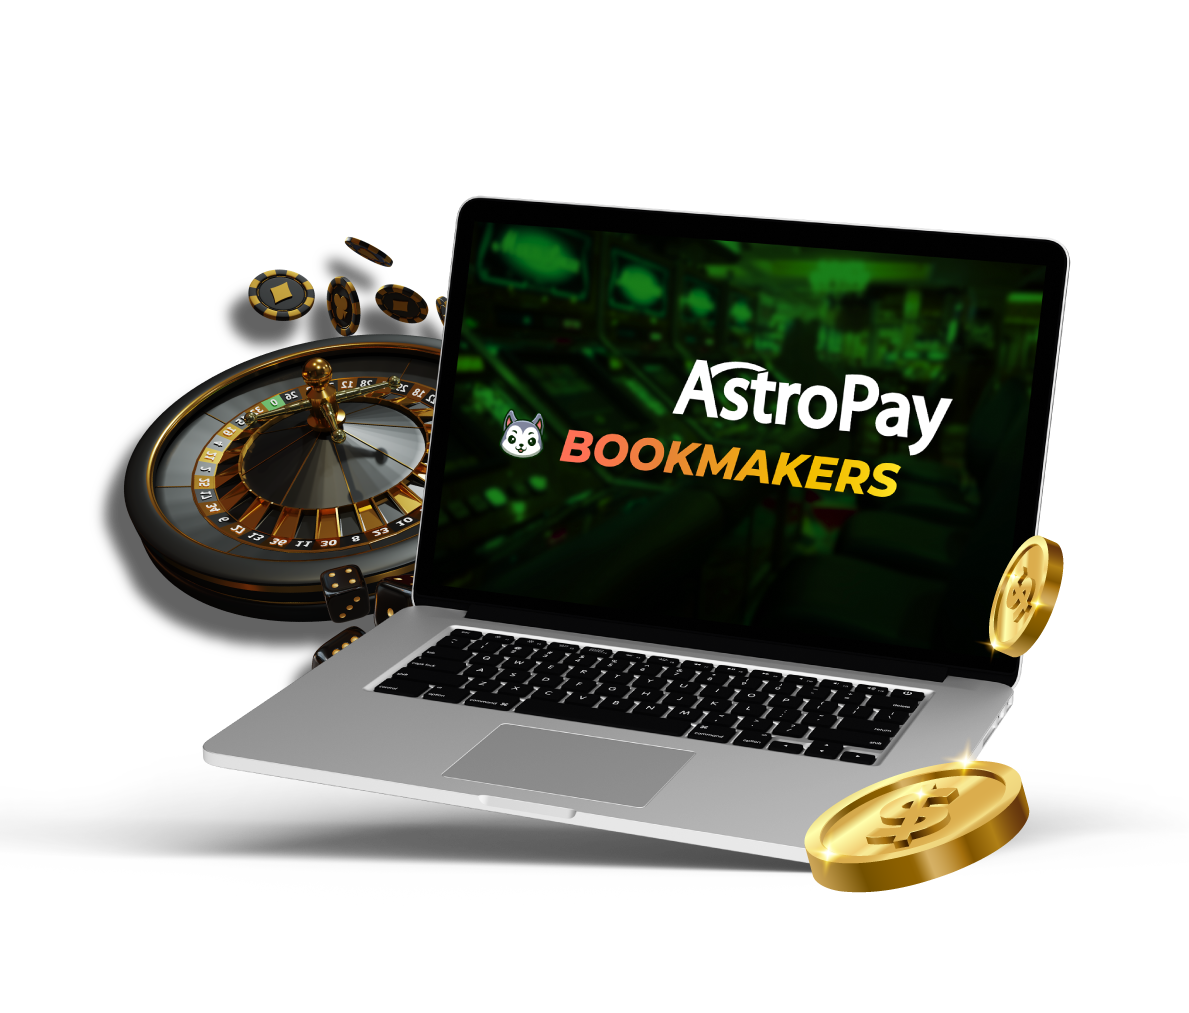 AstroPay Bookmakers